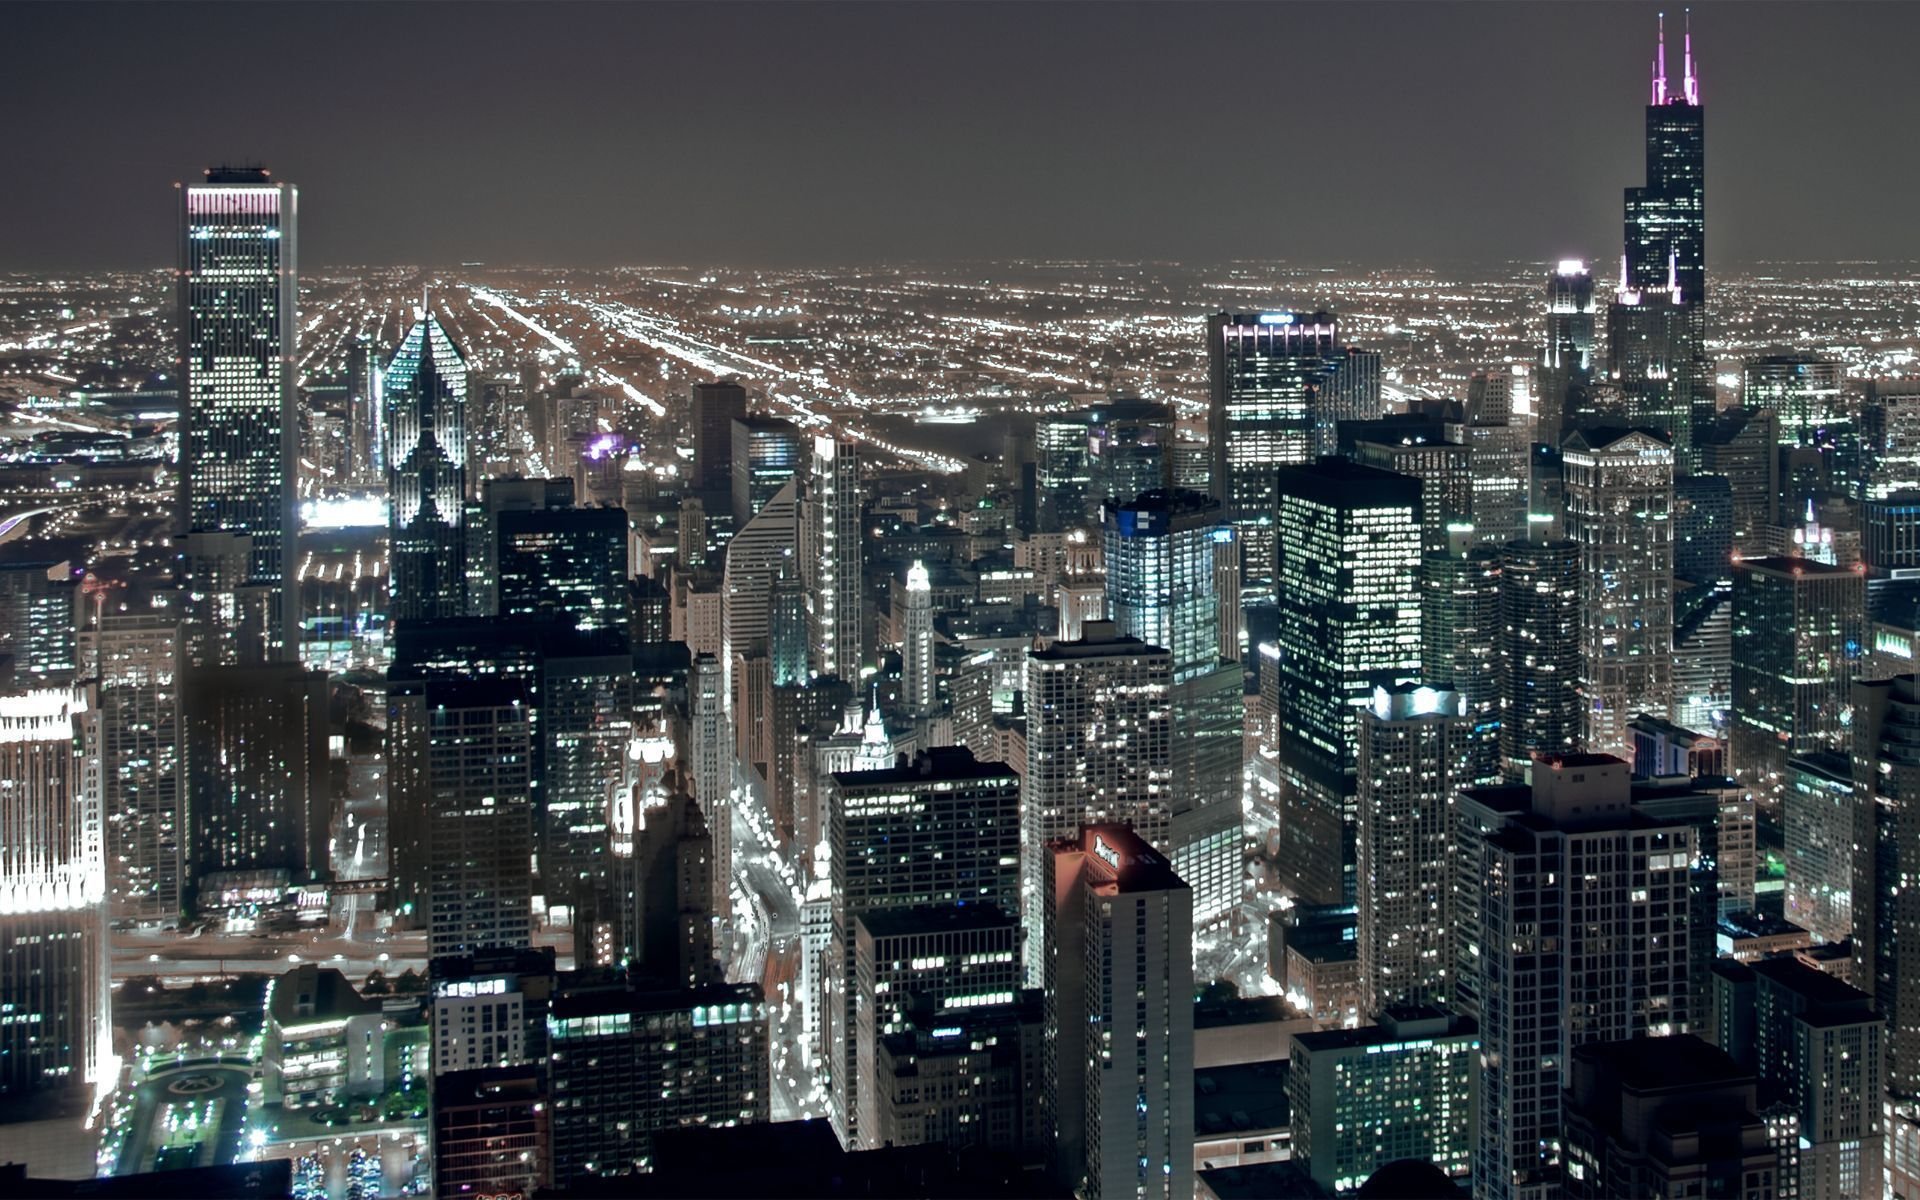 cityscapes, Night, Buildings Wallpaper